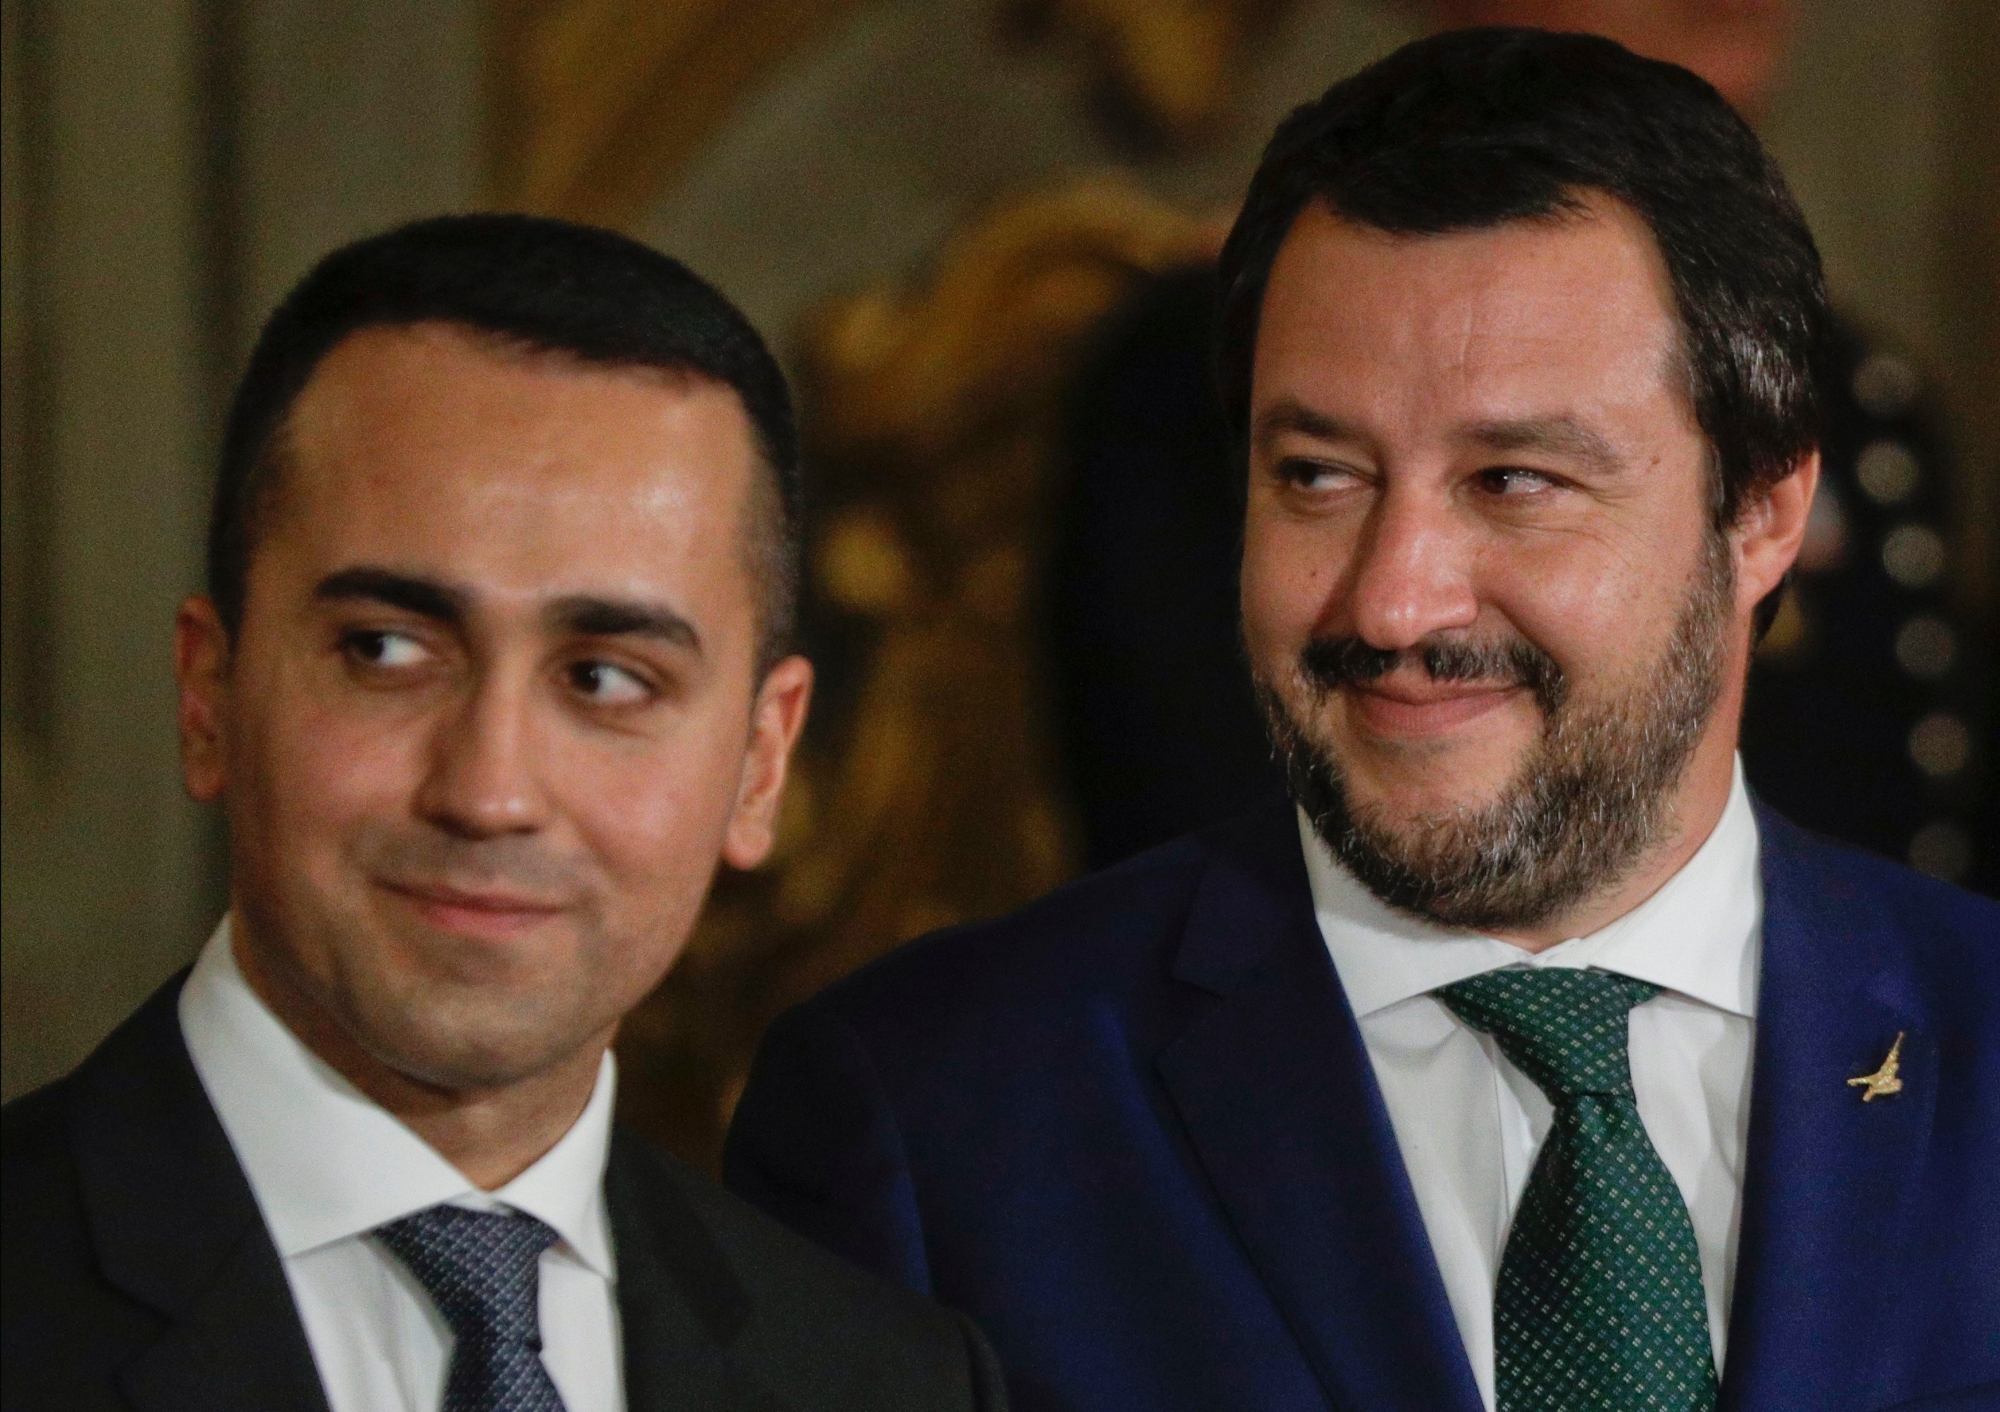 FILE - In this June 1, 2018 file photo, leader of the League party Matteo Salvini, right, stands by Luigi Di Maio, leader of the Five-Star movement, prior to the swearing-in ceremony for Italy's new government at Rome's Quirinale Presidential Palace. Five weeks after taking national office, opinion polls indicate that SalviniÄôs anti-migrant, anti-European Union party has soared in popularity.(AP Photo/Gregorio Borgia, file) ITALY POLITICS ONE MAN SHOW